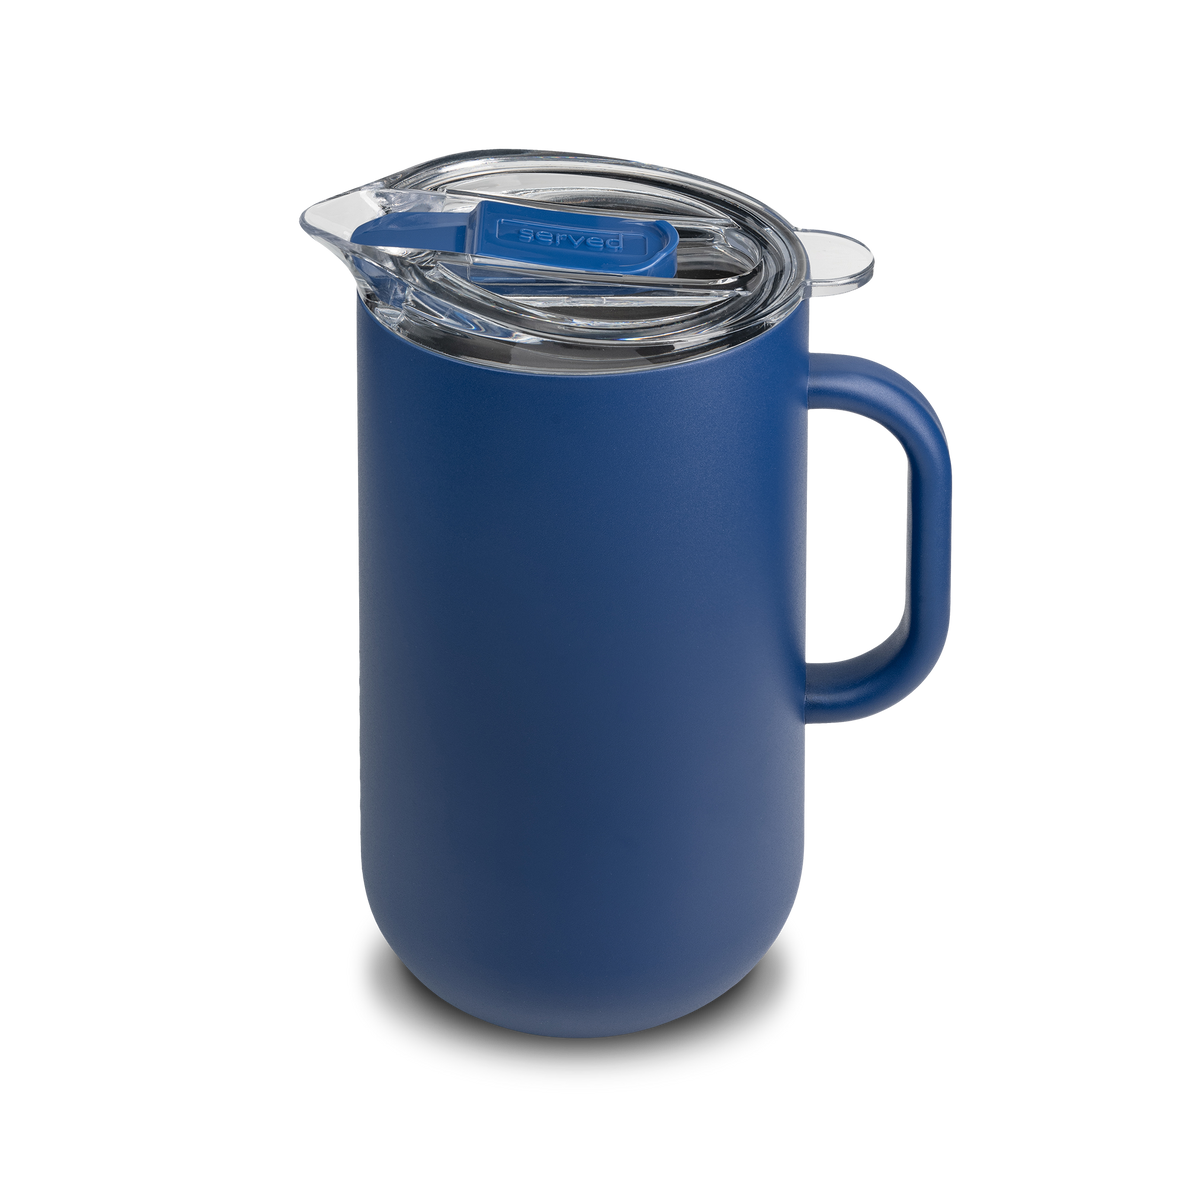 SERVED - Stainless Steel Pitcher with Lid (2L) | Insulated Drink Dispenser  Keeps Beverages Cold or Hot for Hours I Travel Pitcher, Leak Proof (Blue